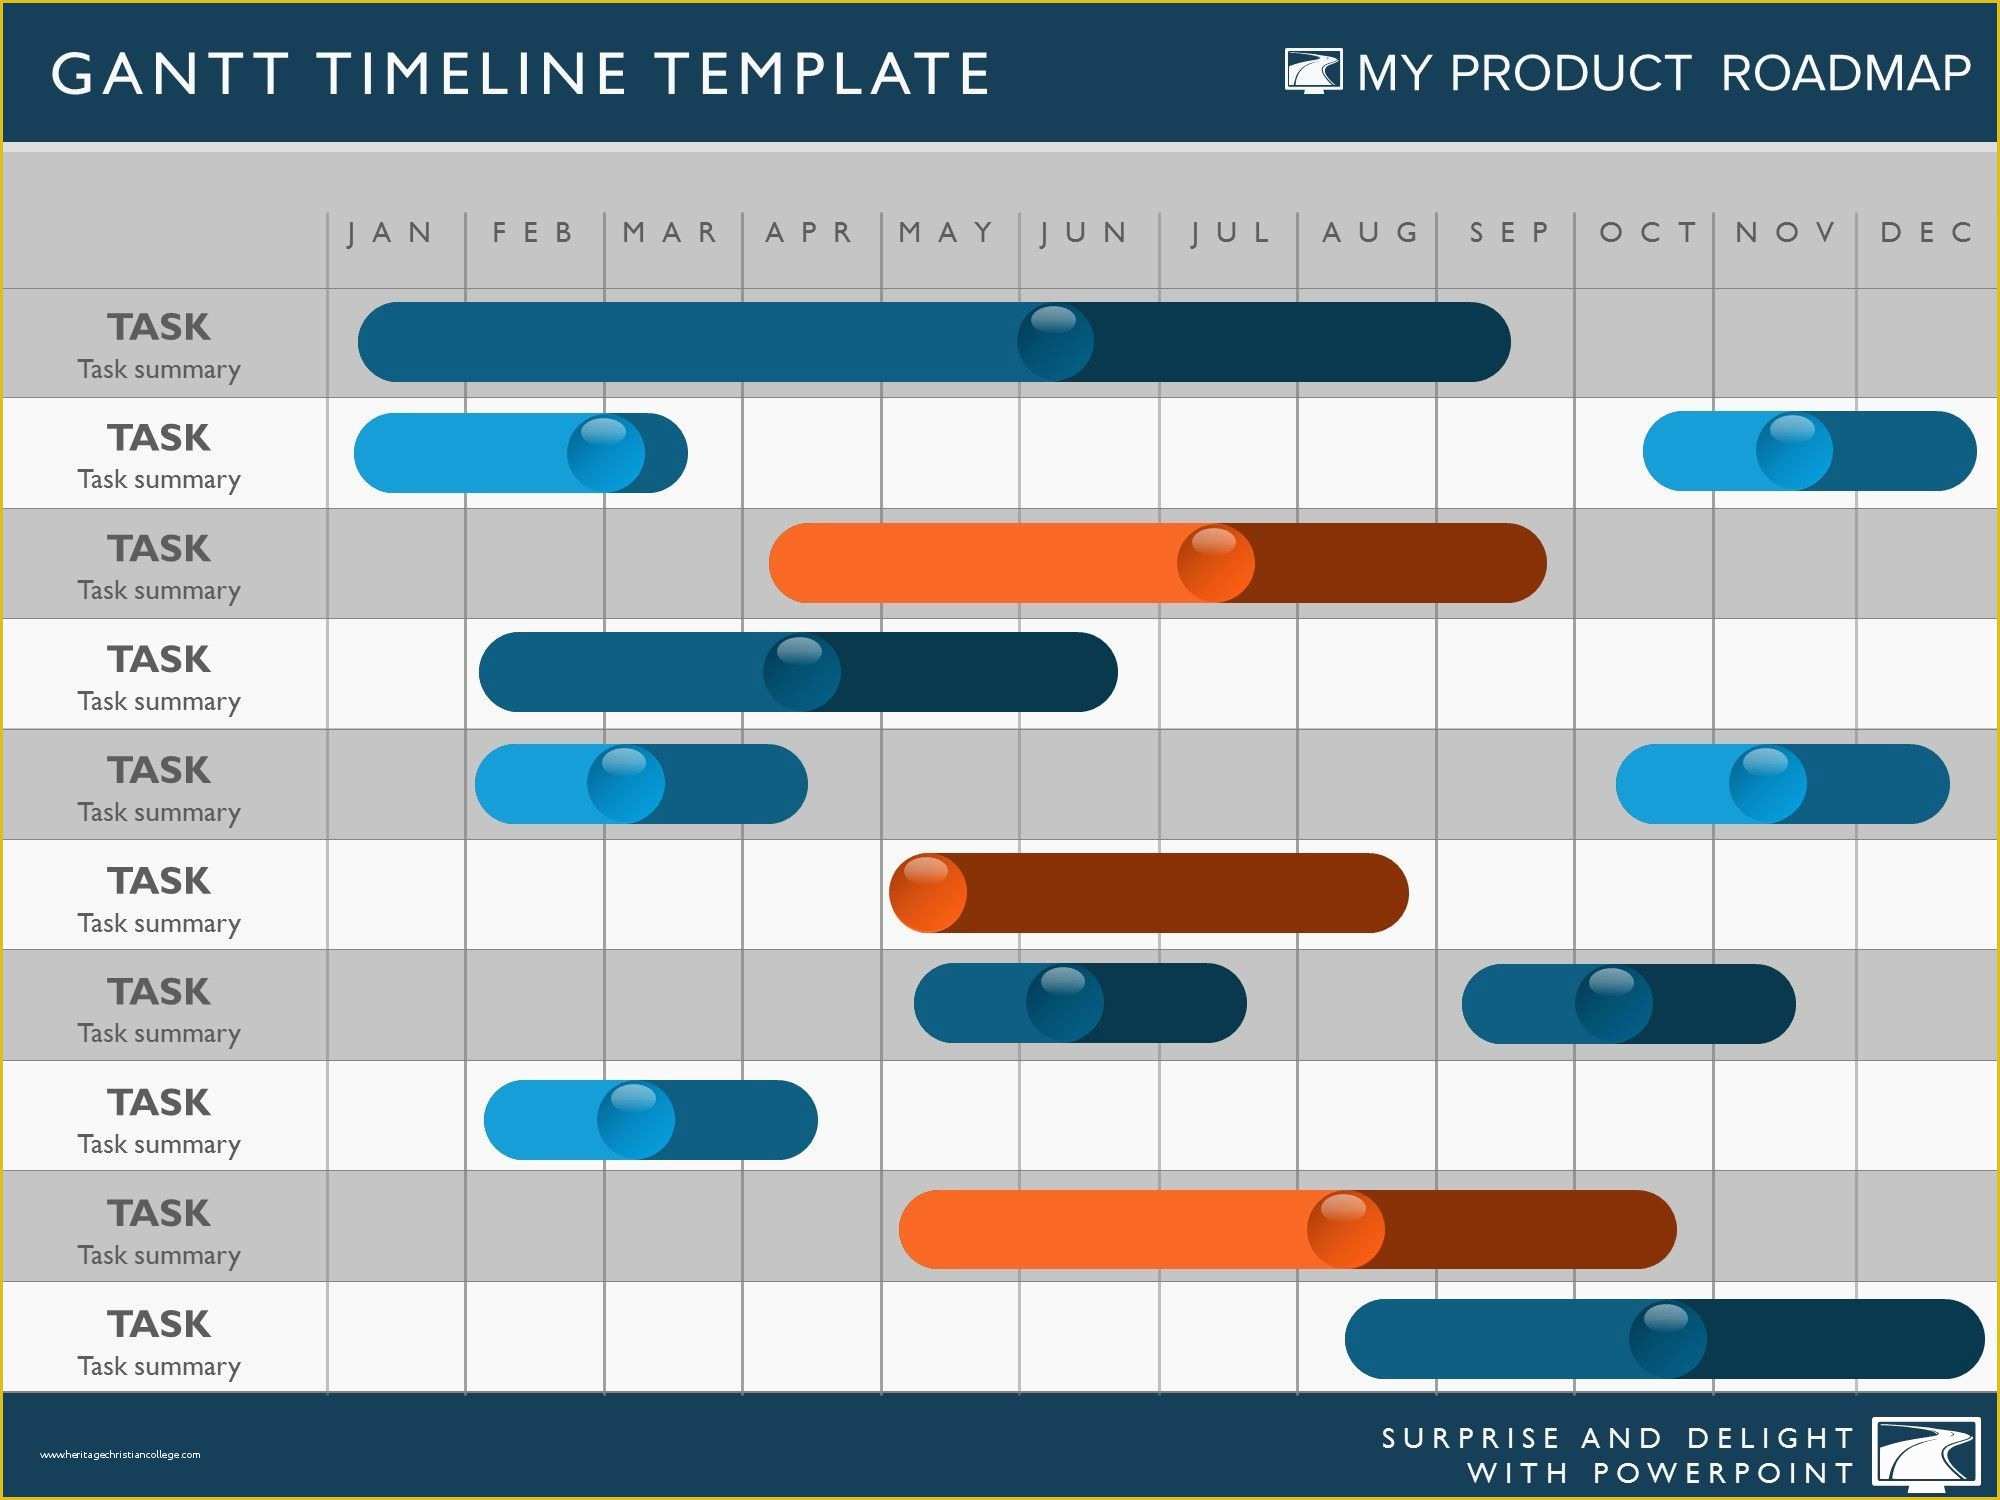 Free Roadmap Template Of Timeline Template – My Product Roadmap